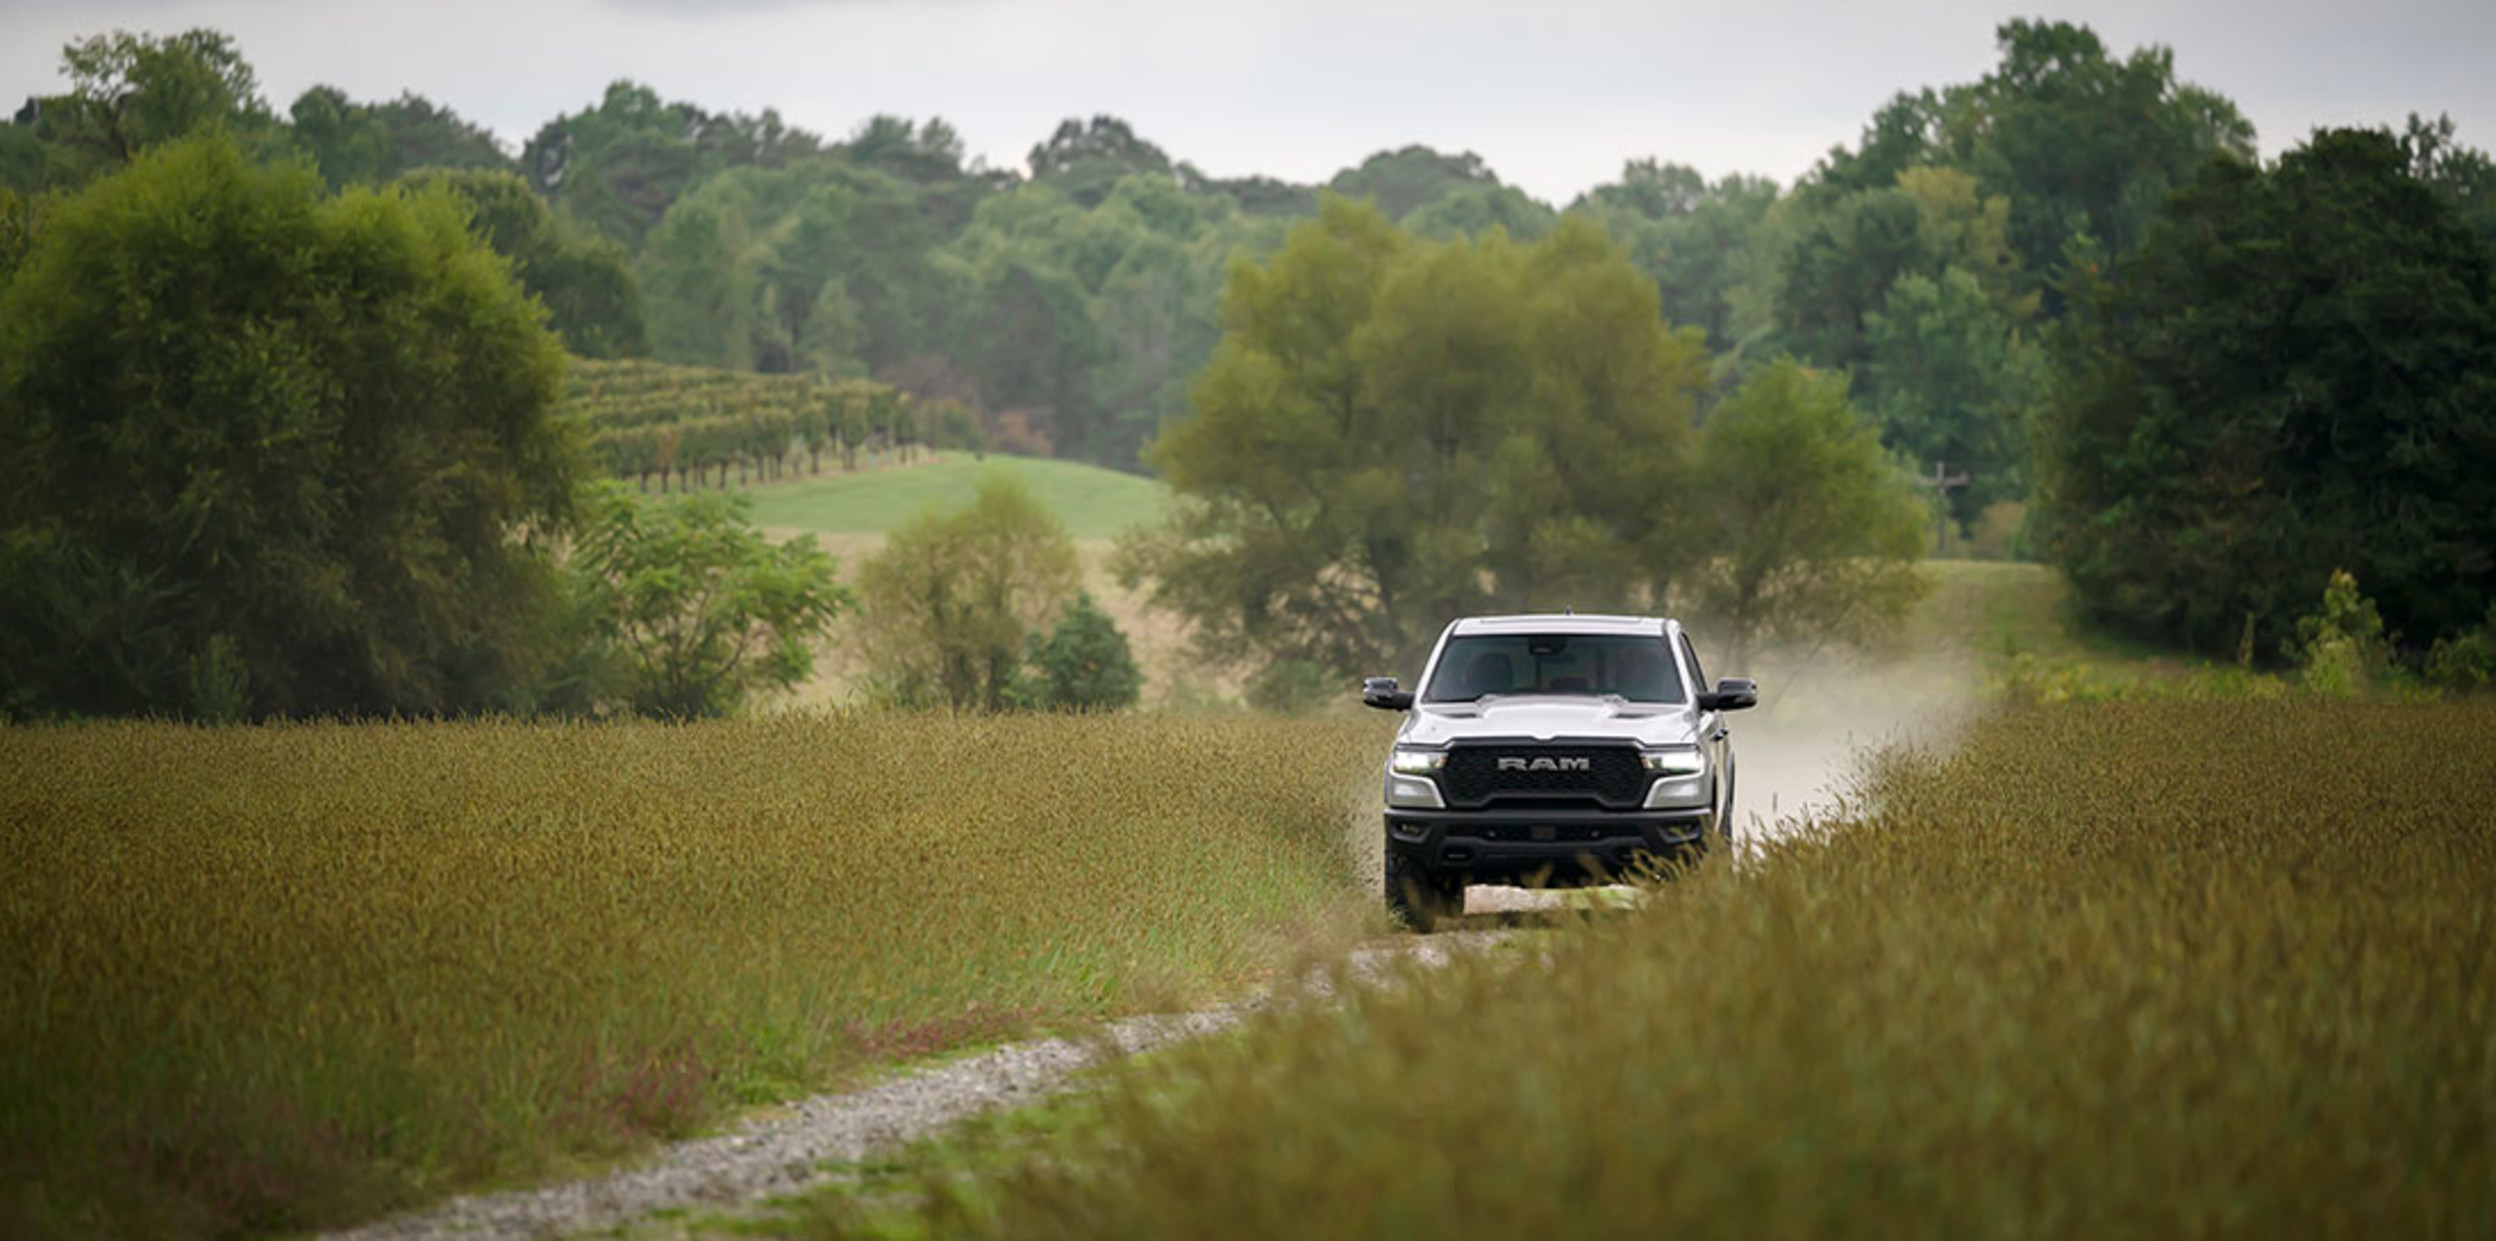 View of a white 2025 Ram 1500 shown driving along an unpaved roadway with trees shown in the distance.